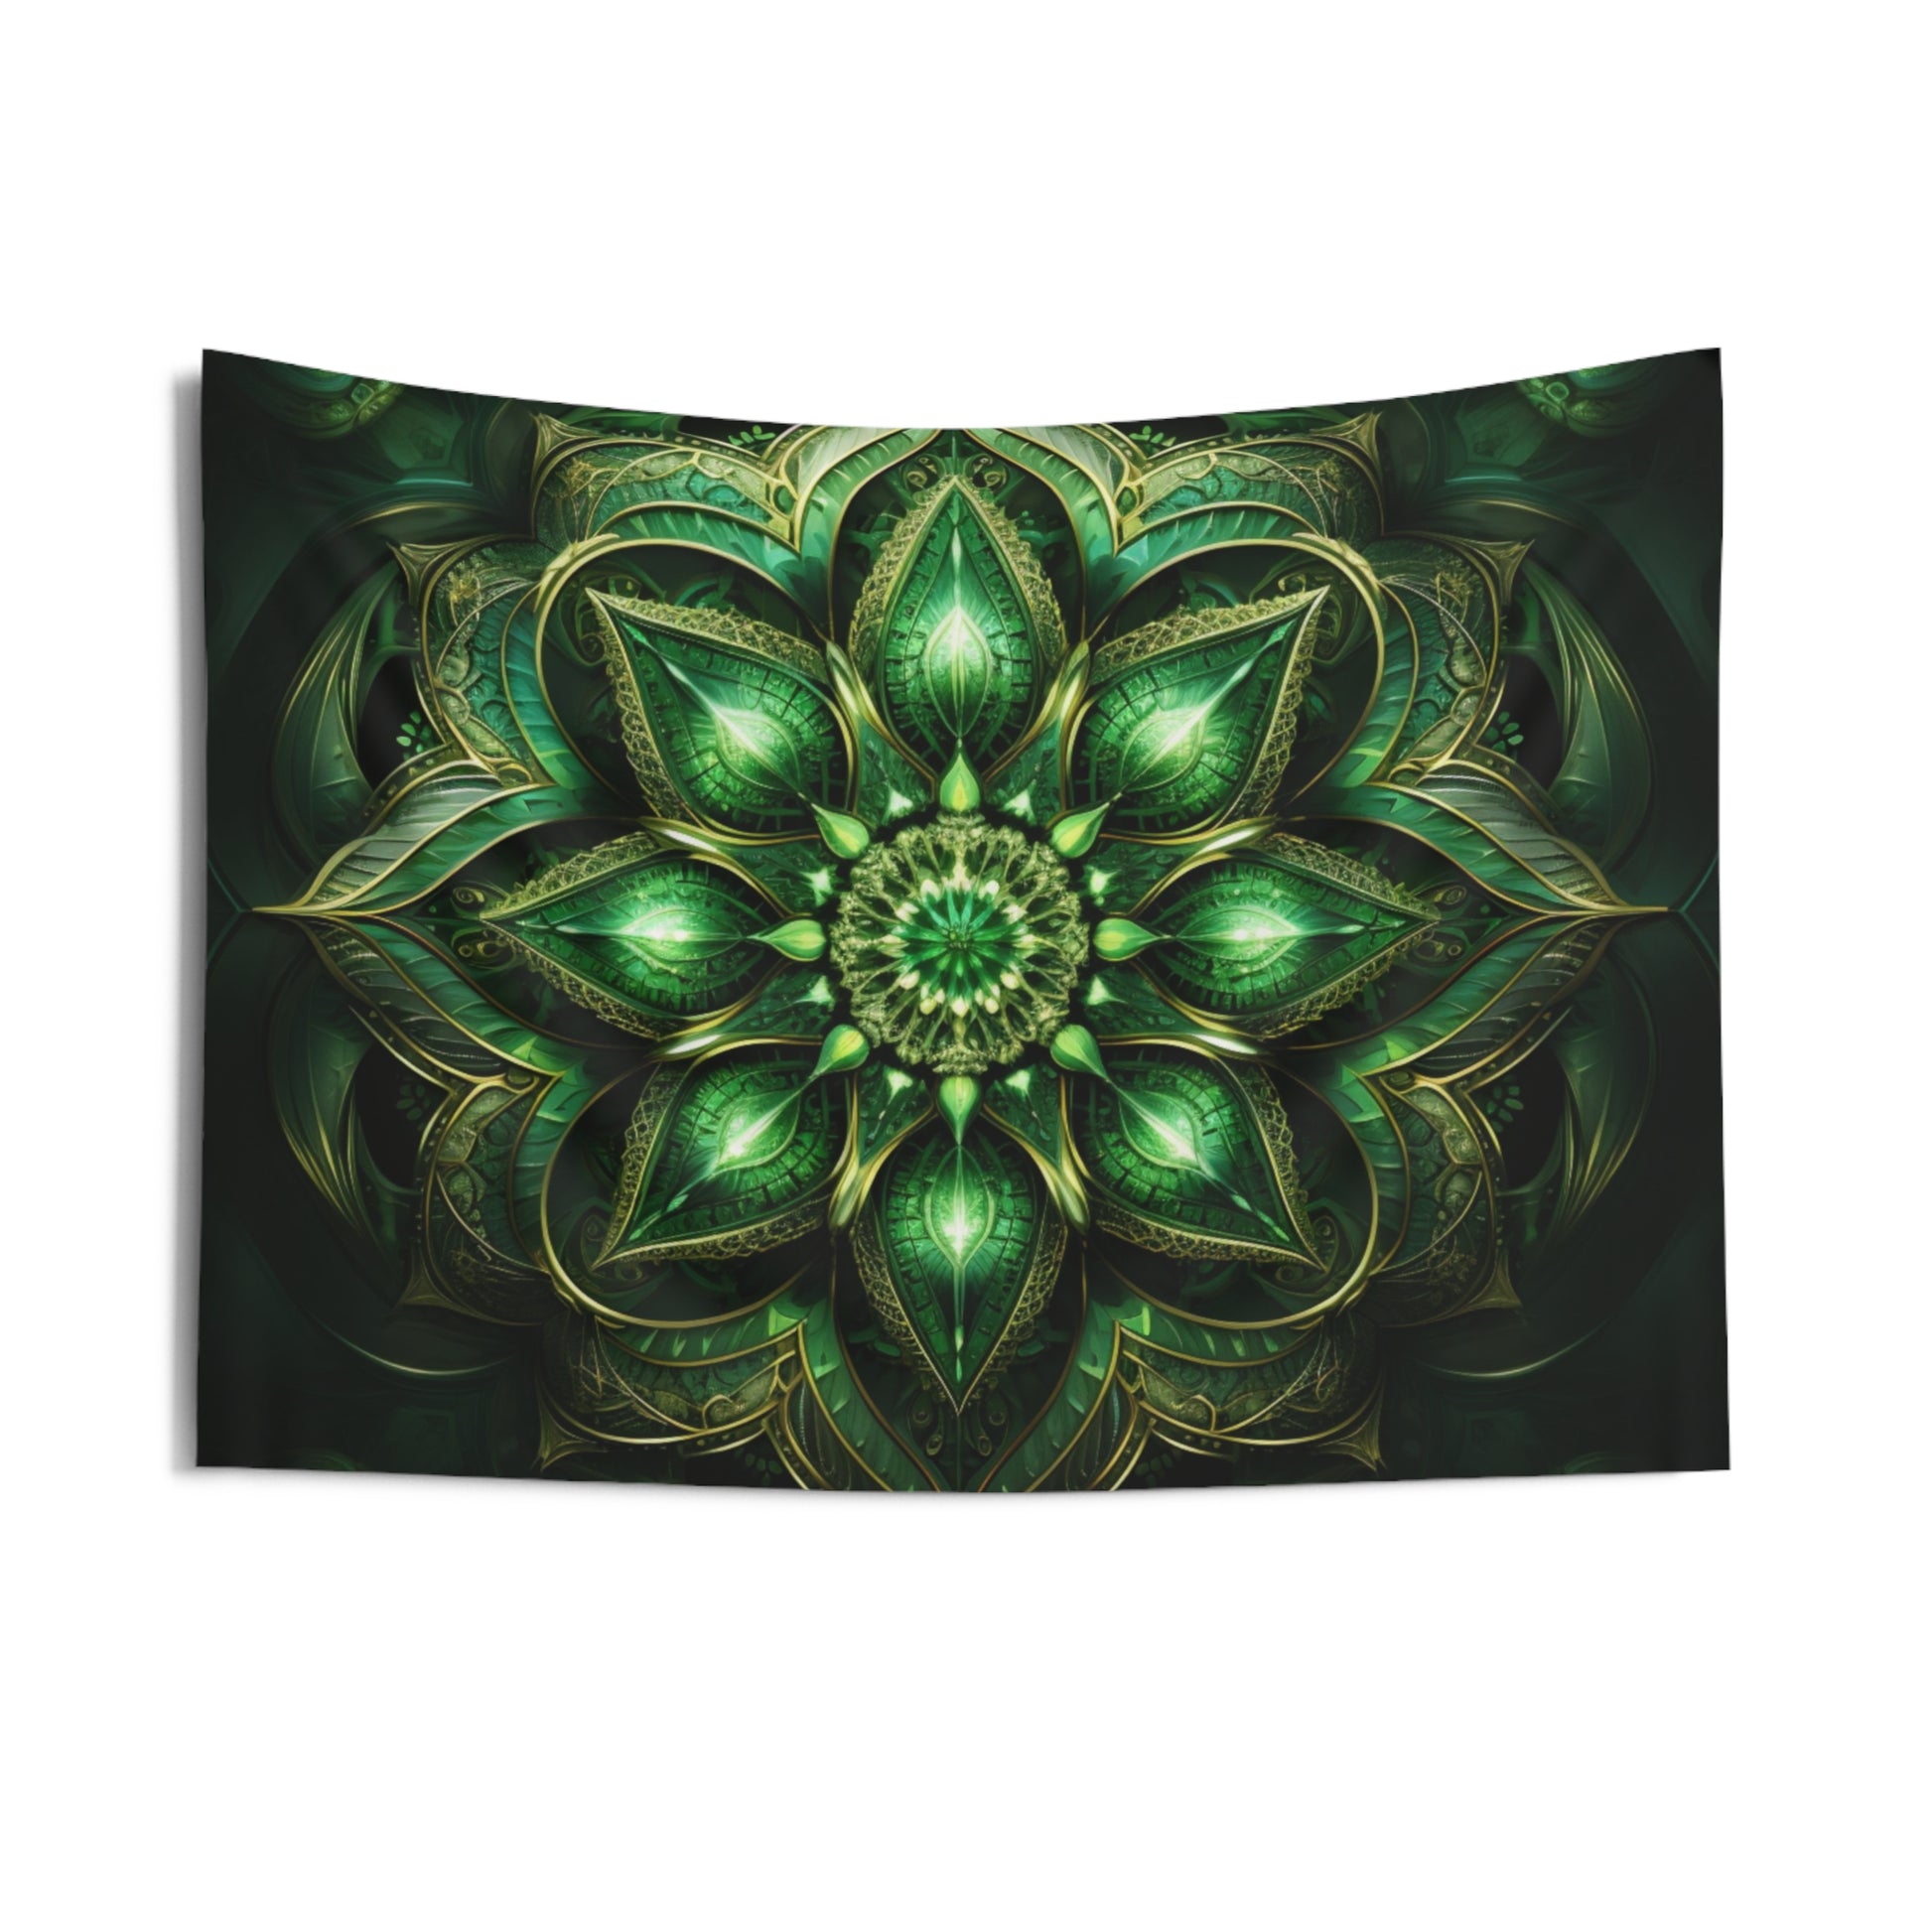 Green Mandala Tapestry, Wall Art Hanging Cool Unique Landscape Aesthetic Large Small Decor Bedroom College Dorm Room Starcove Fashion